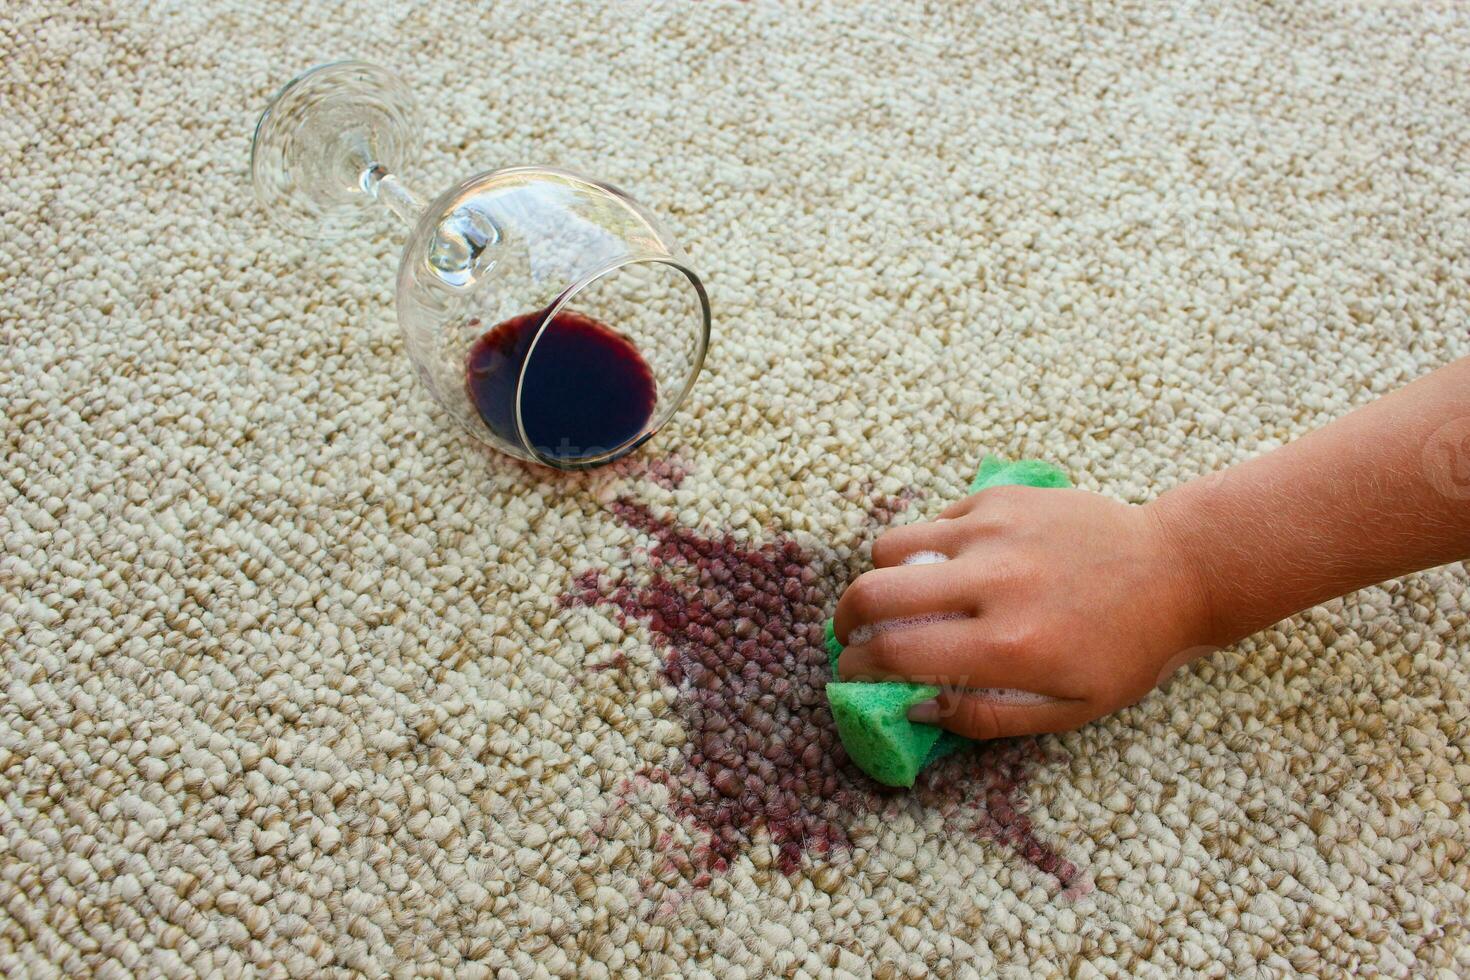 glass of red wine fell on carpet, wine spilled on carpet. Female hand cleans the carpet with a sponge and detergent. photo